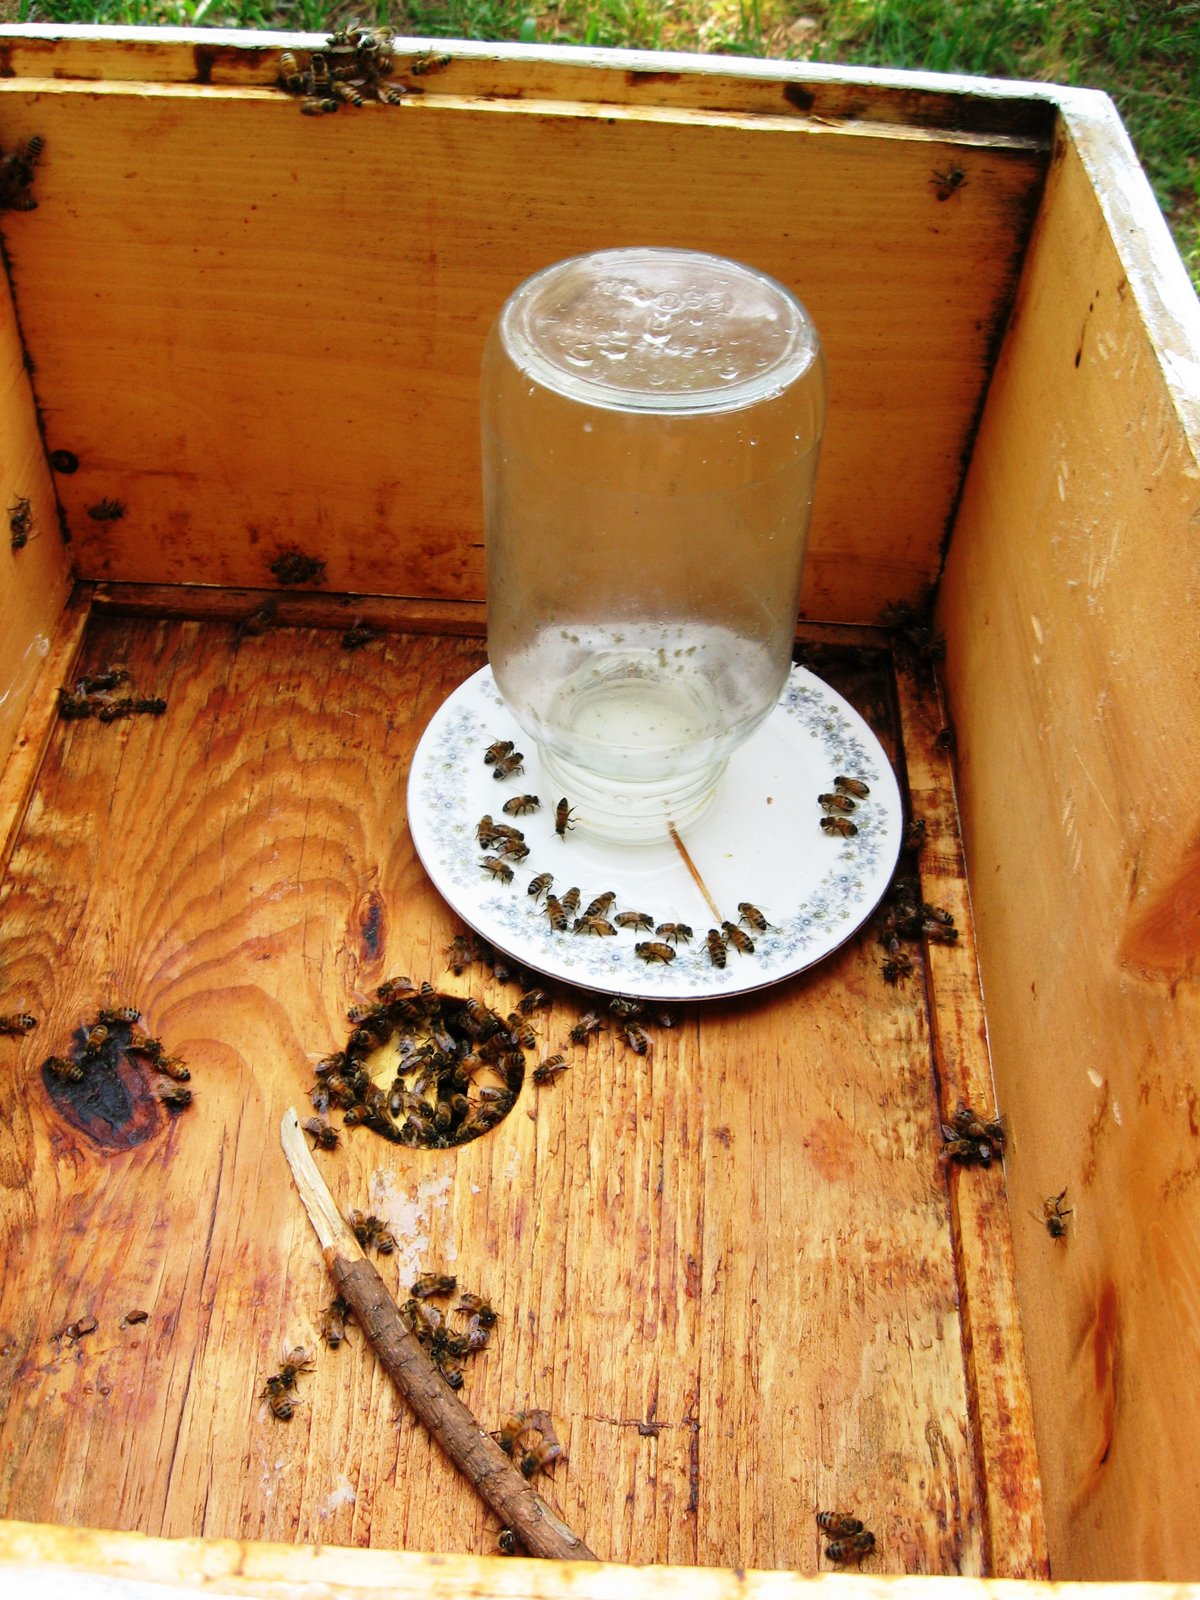 [072198+Bees+and+Putting+Honey+in+Jars+006.jpg]